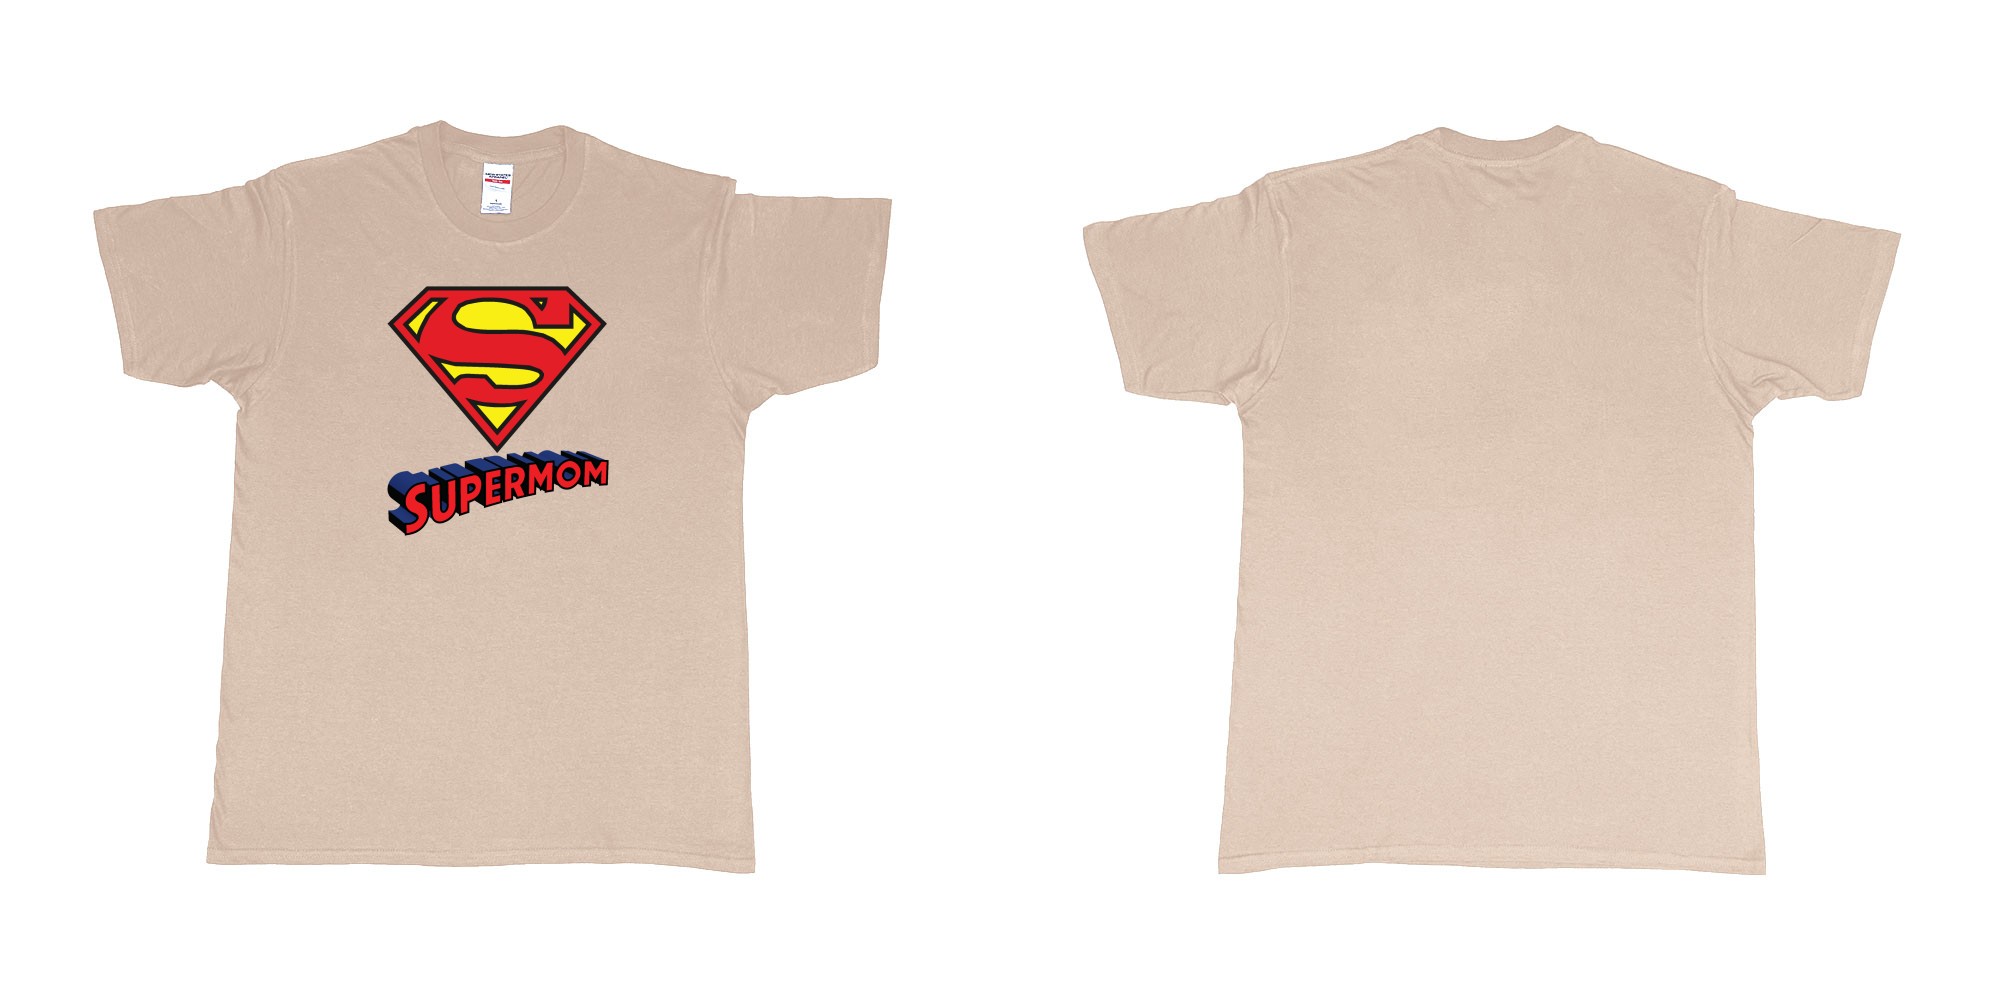 Custom tshirt design superman logo with own custom text print bali in fabric color sand choice your own text made in Bali by The Pirate Way